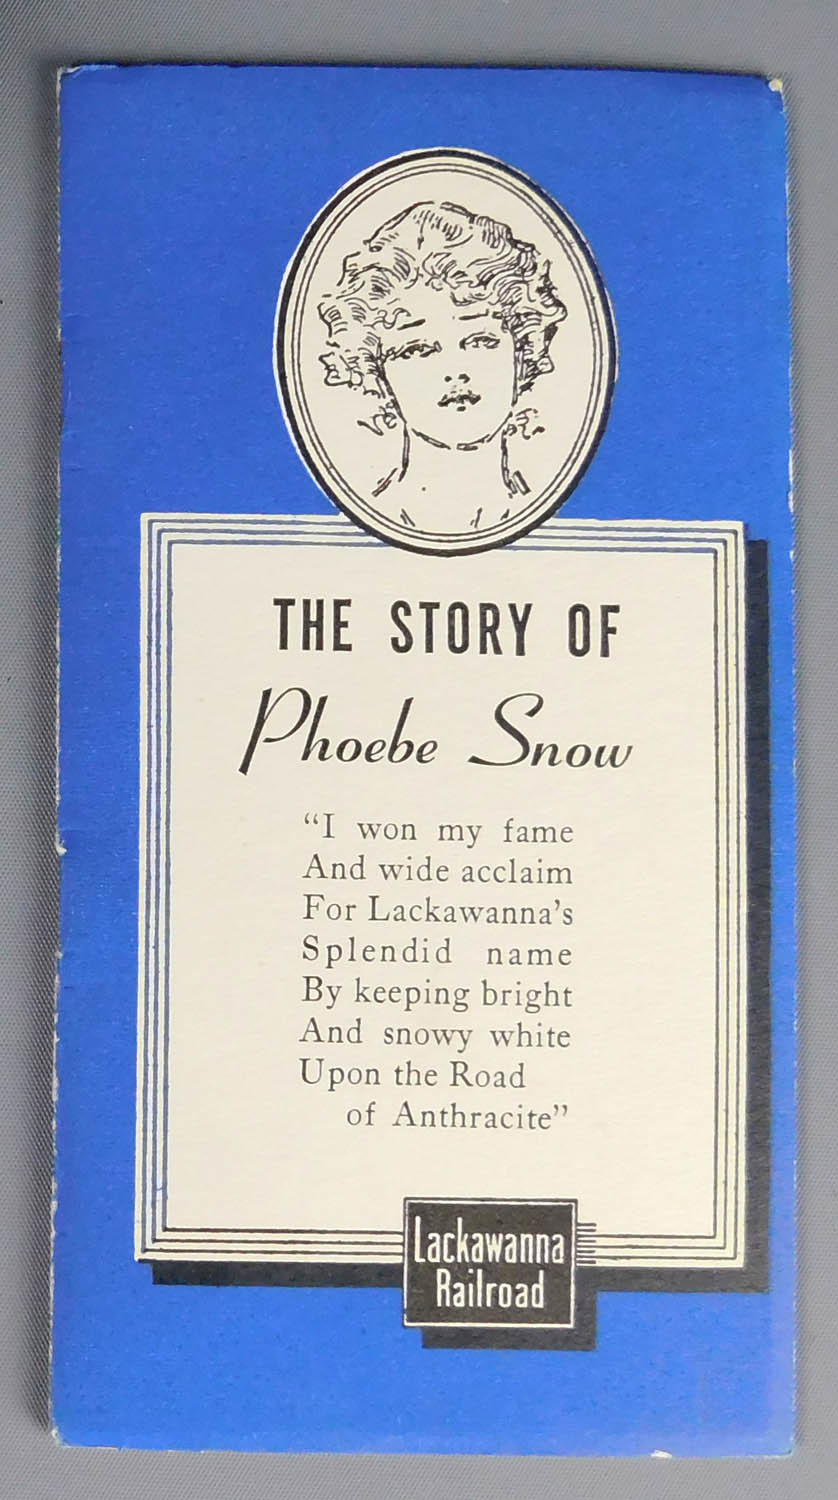 he Story of Phoebe Snow